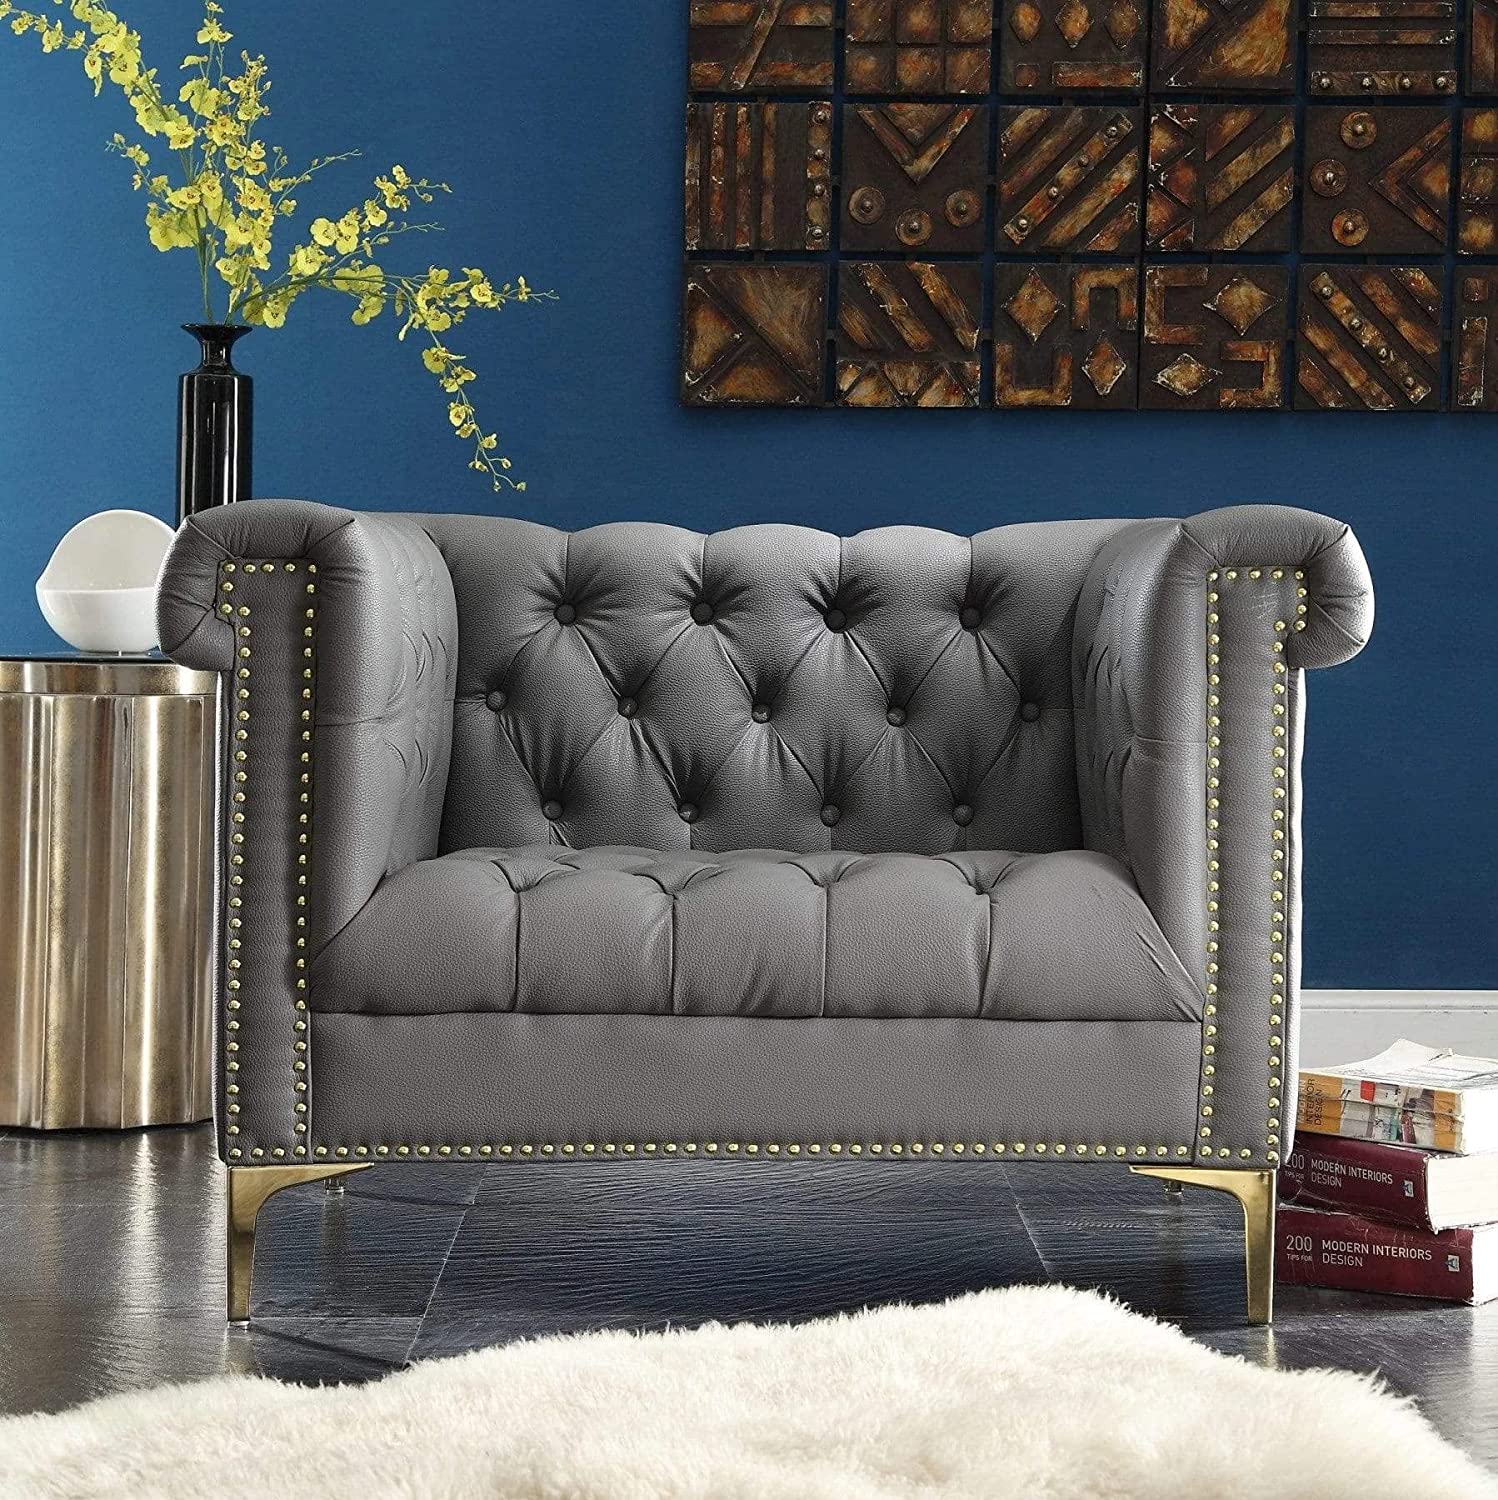 ES ESPINHO ESP153 Solid Sal Wood Leatherette Button Tufted Sophisticated, Elegant, Durable & Comfortable 1 Seater Chesterfield Sofa (Single Seater)